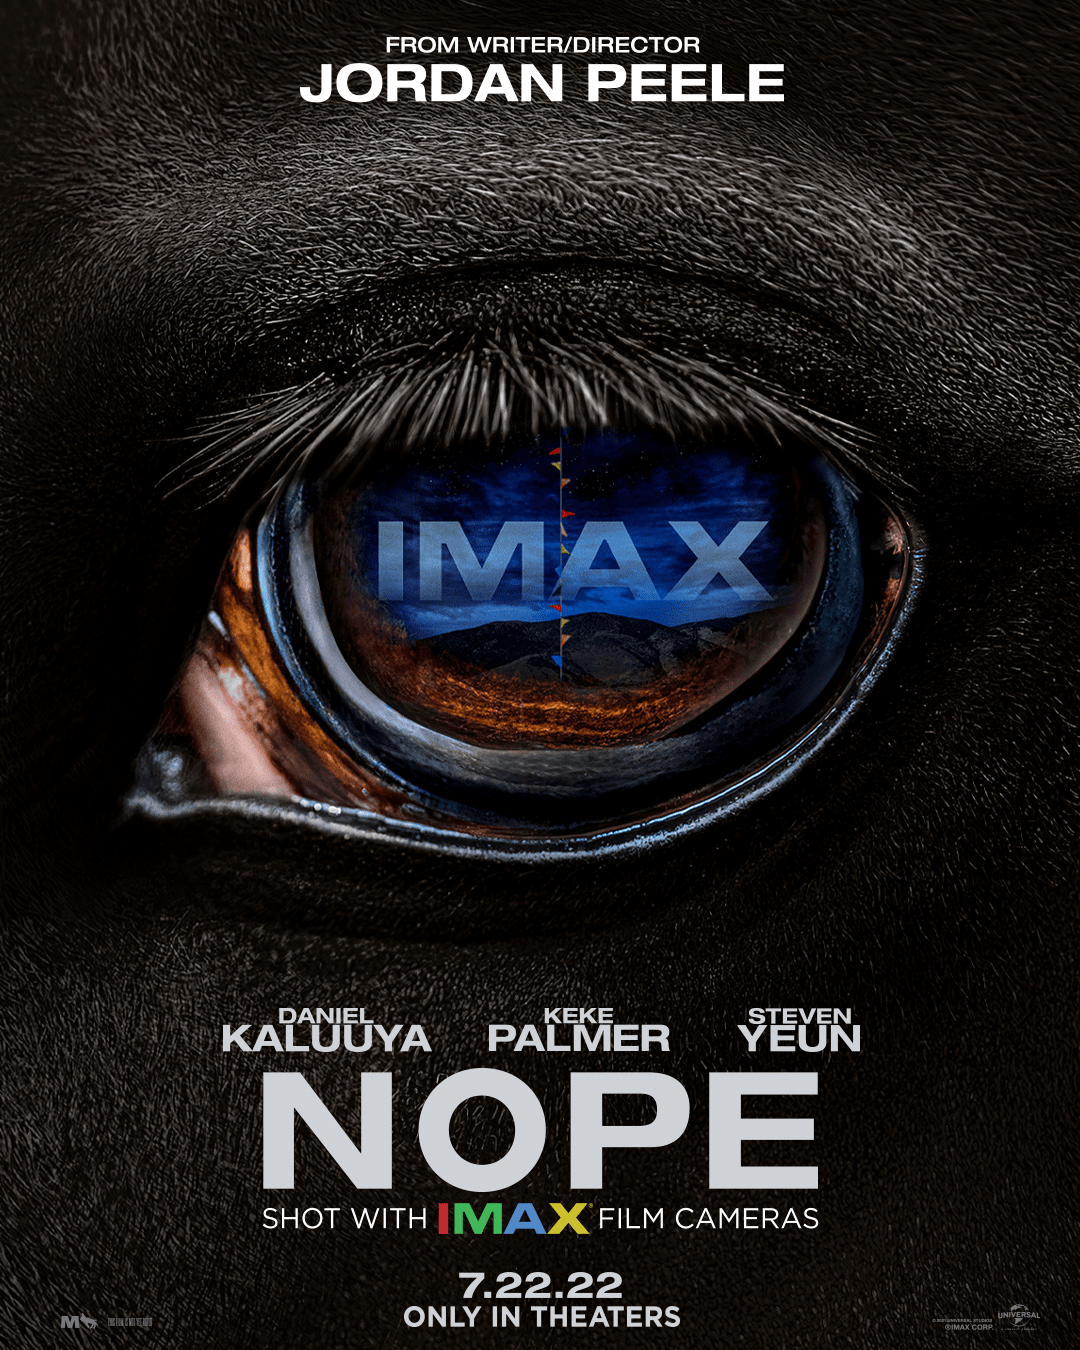 IMAX Poster for Jordan Peele's 'Nope' Has Got Its Eye on You...